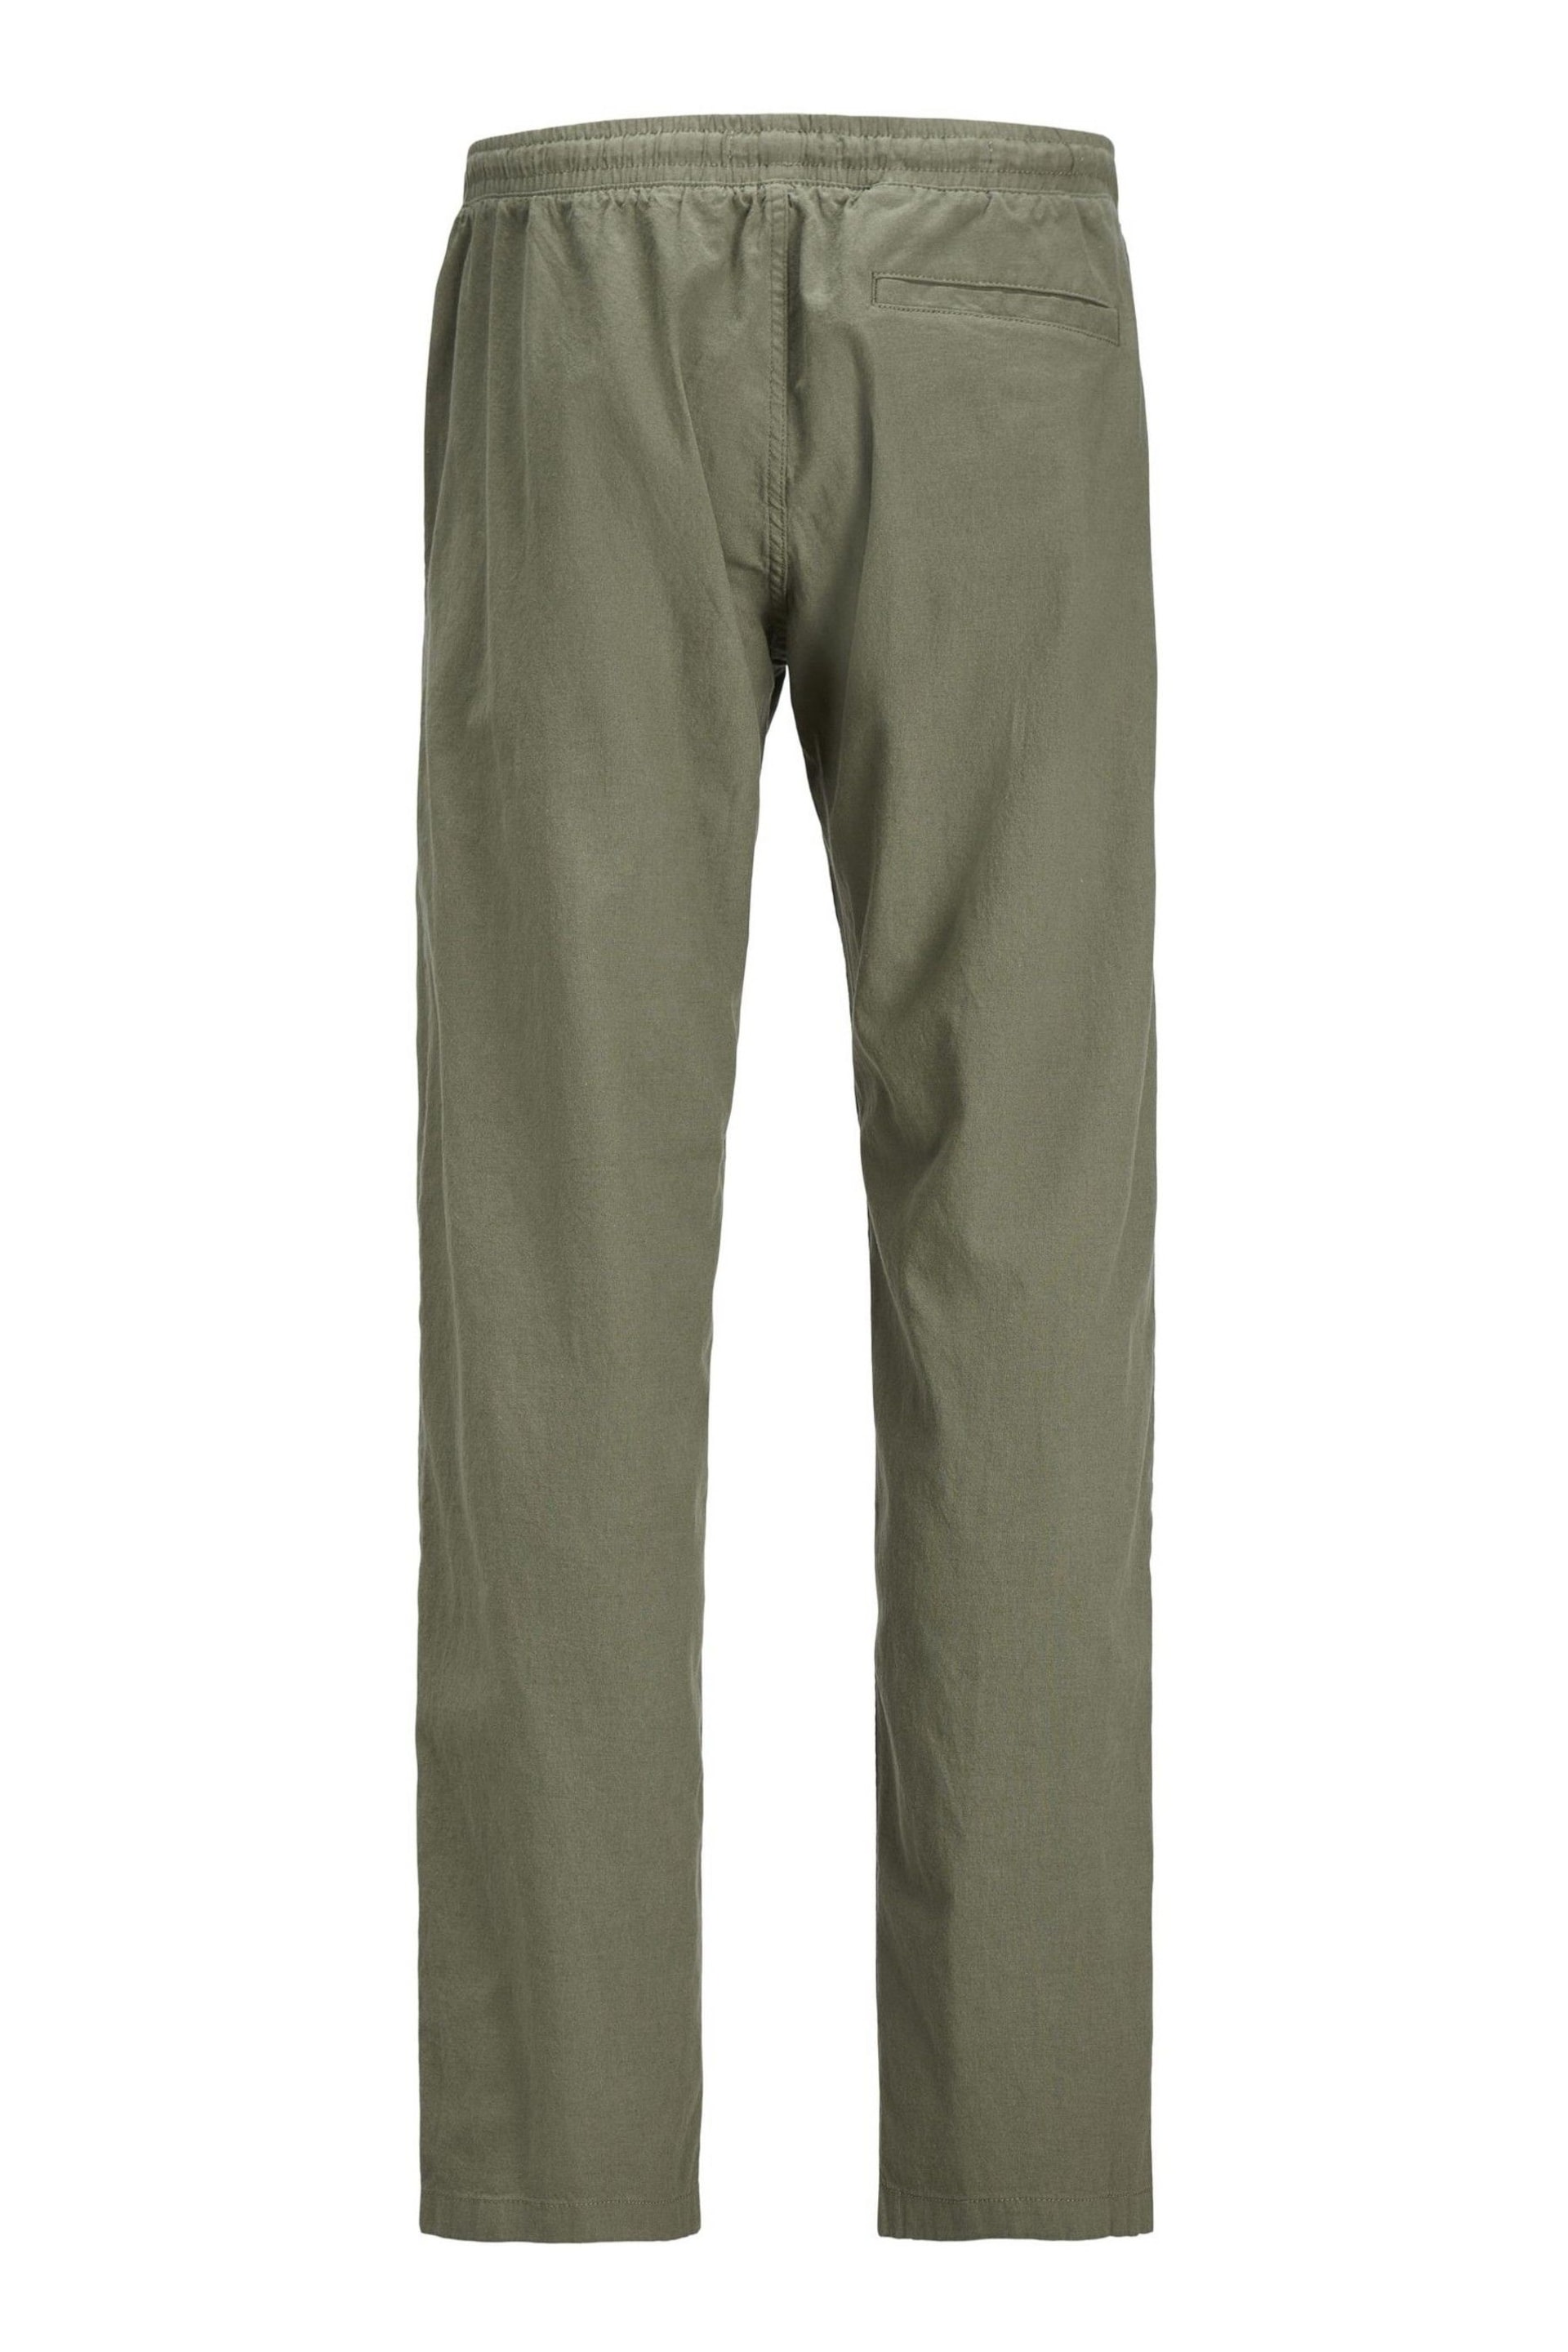 JACK & JONES Brown Linen Blend Relaxed Fit Trousers - Image 5 of 5